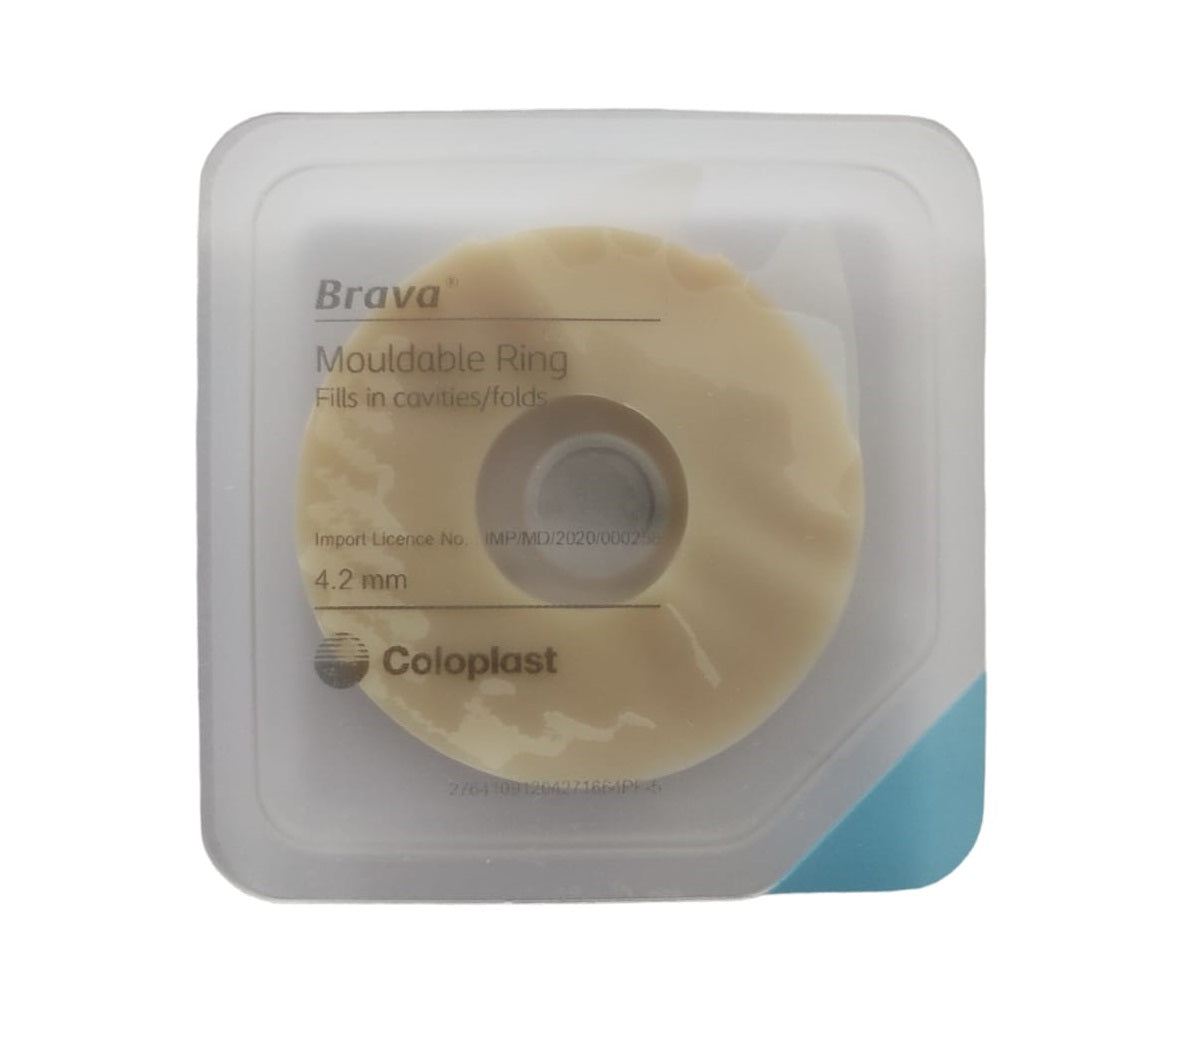 Coloplast Brava Mouldable Ring 4.2 mm 12042